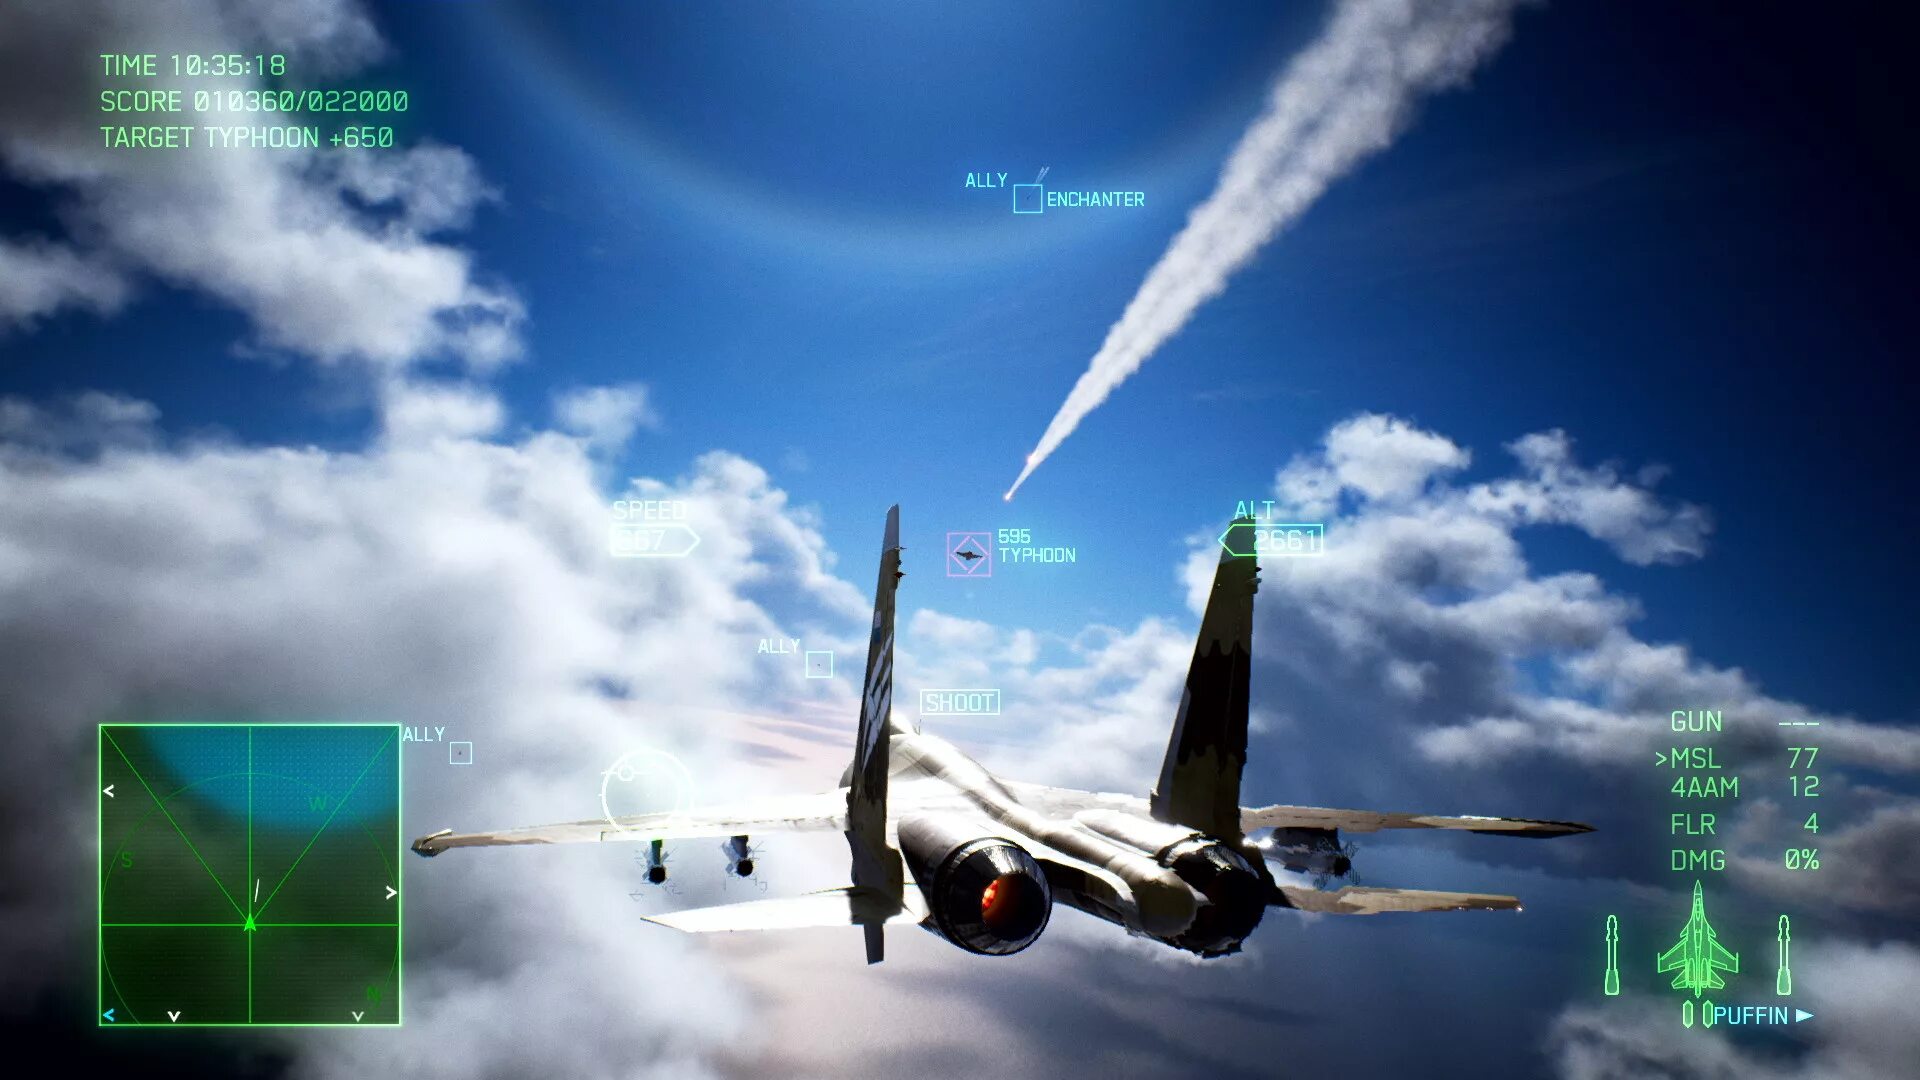 Ace Combat 7: Skies Unknown. Ace Combat 7 screenshot. Ace Combat 7 Скриншоты. Ace Combat 7: Skies Unknown - unexpected Visitor. Ace combat купить